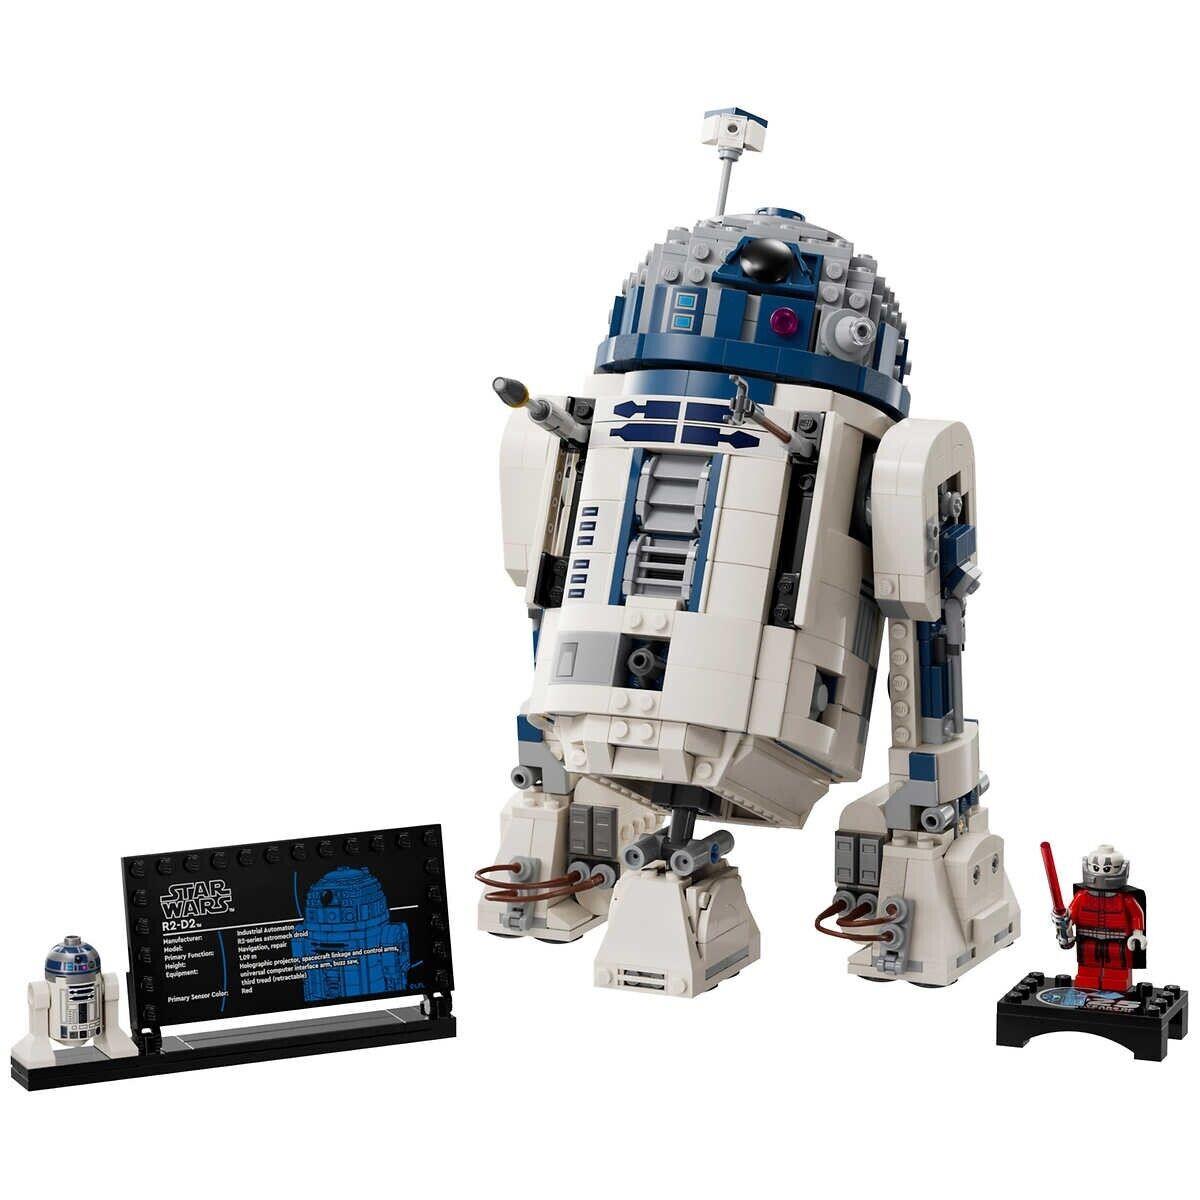 Lego Star Wars R2-D2 360 1 050 Pieces with 2-Minifigures Ages 10+